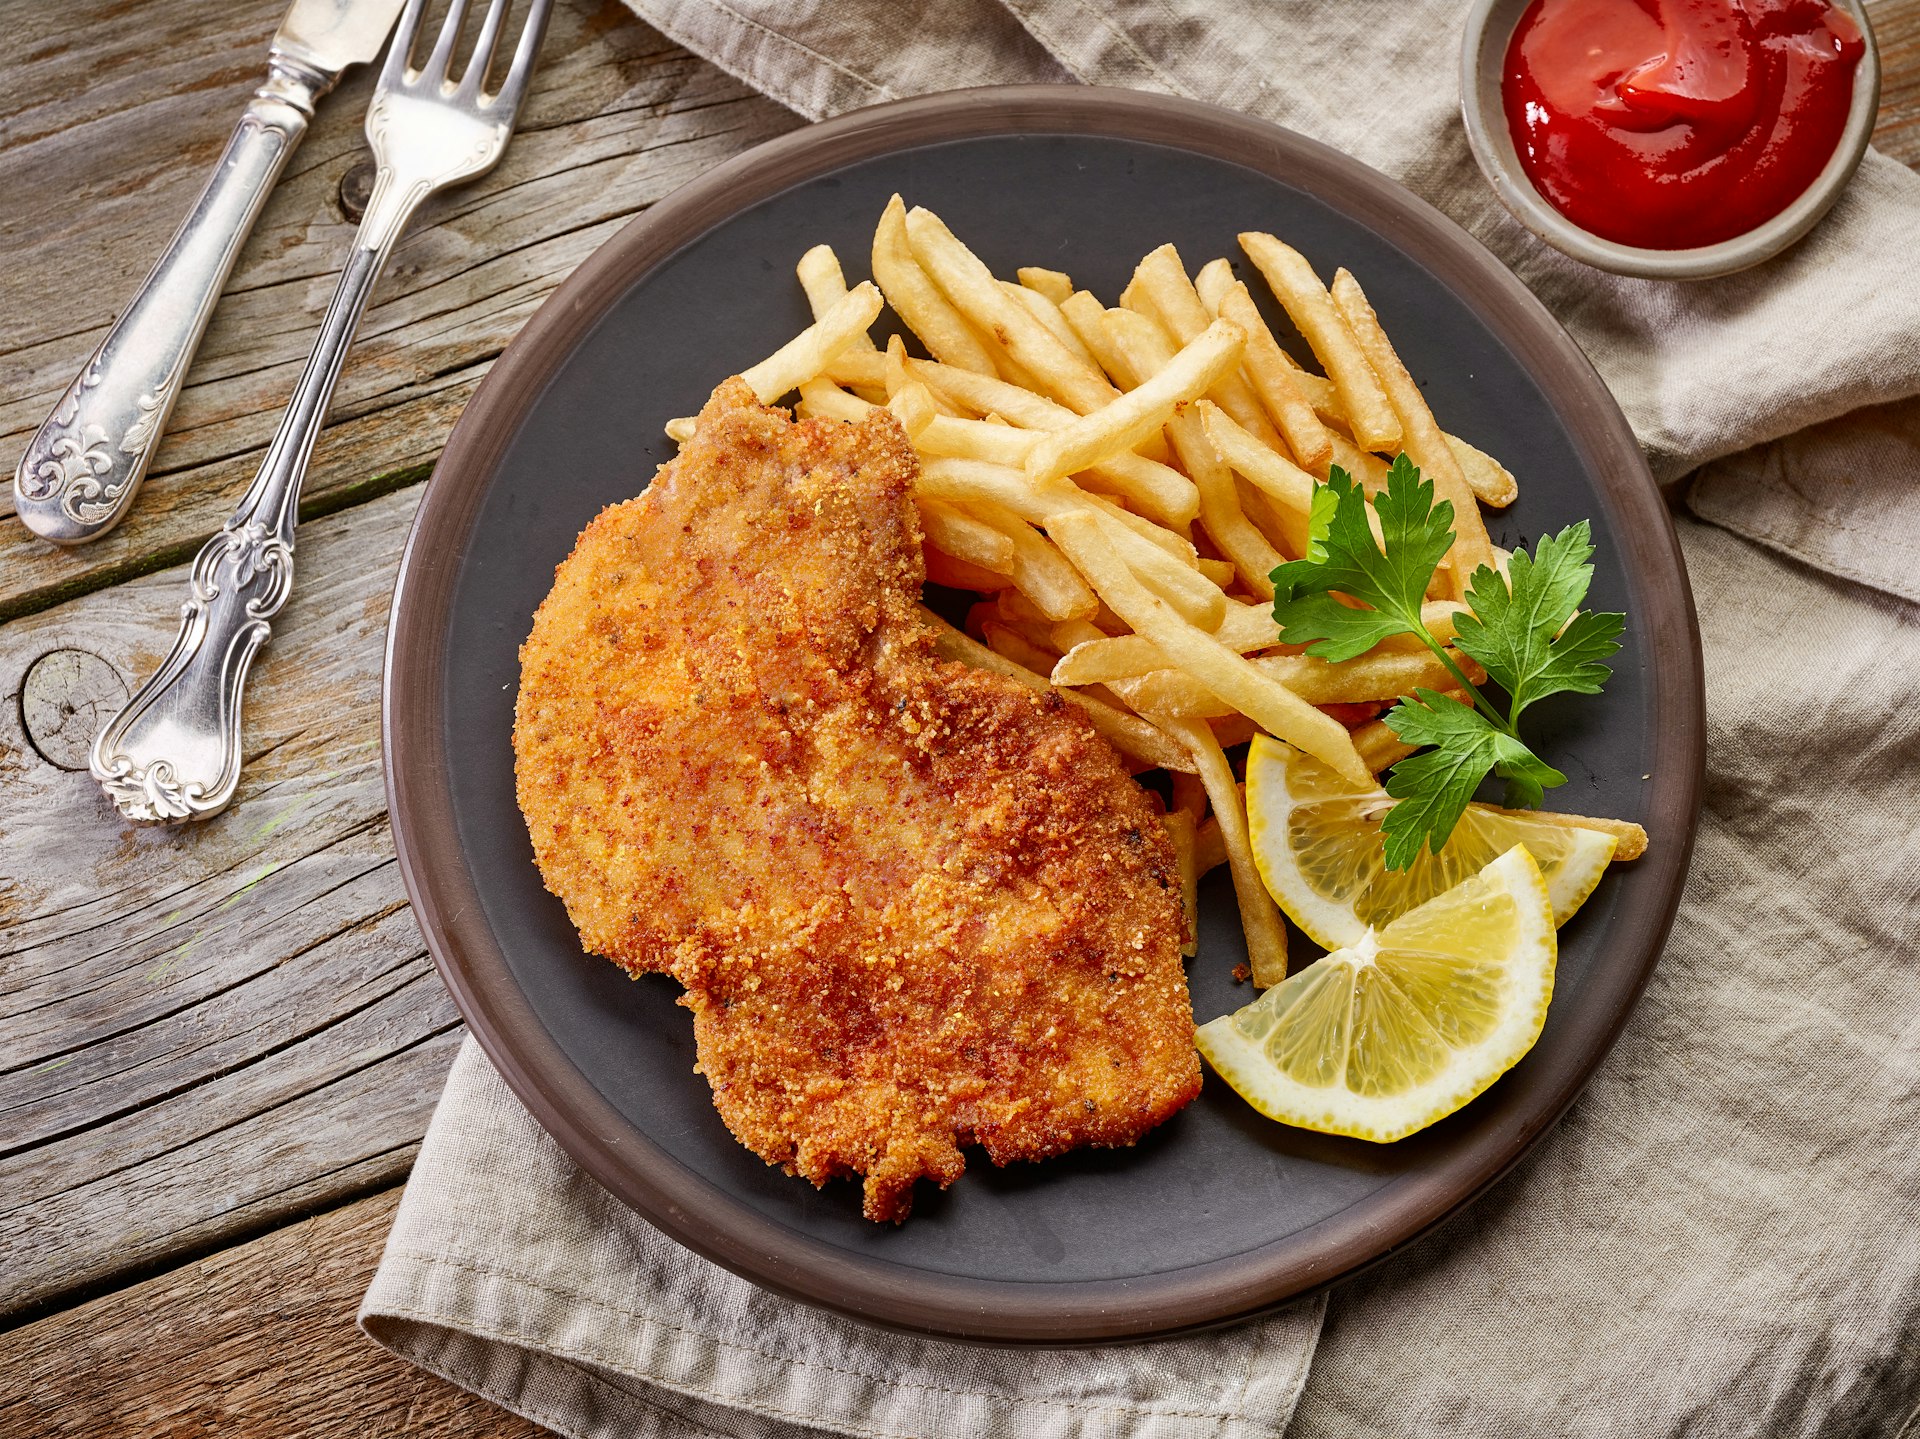 A rustic wooden table with a dinner plate containing schnitzel, French fries and lemon slices